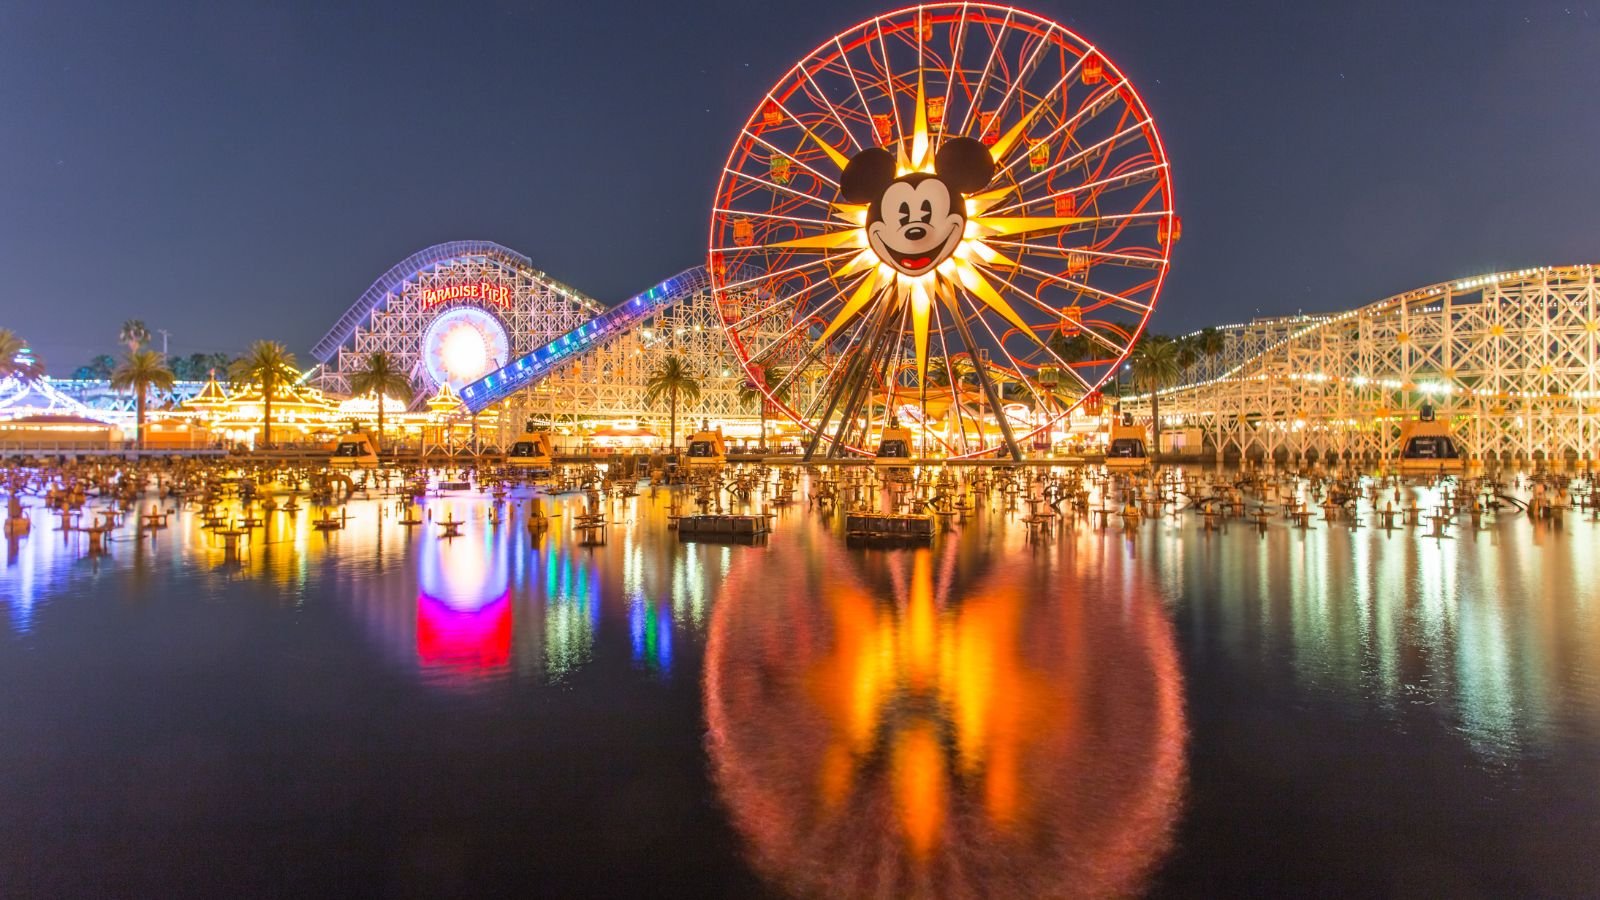 <p>Going to Disneyland may be a common American dream, unfortunately, not every American can live the dream. Of those who have never been to Disneyland, 65% of respondents found the place too expensive for their budget. Around 67% of female respondents felt it was unaffordable for them.</p>